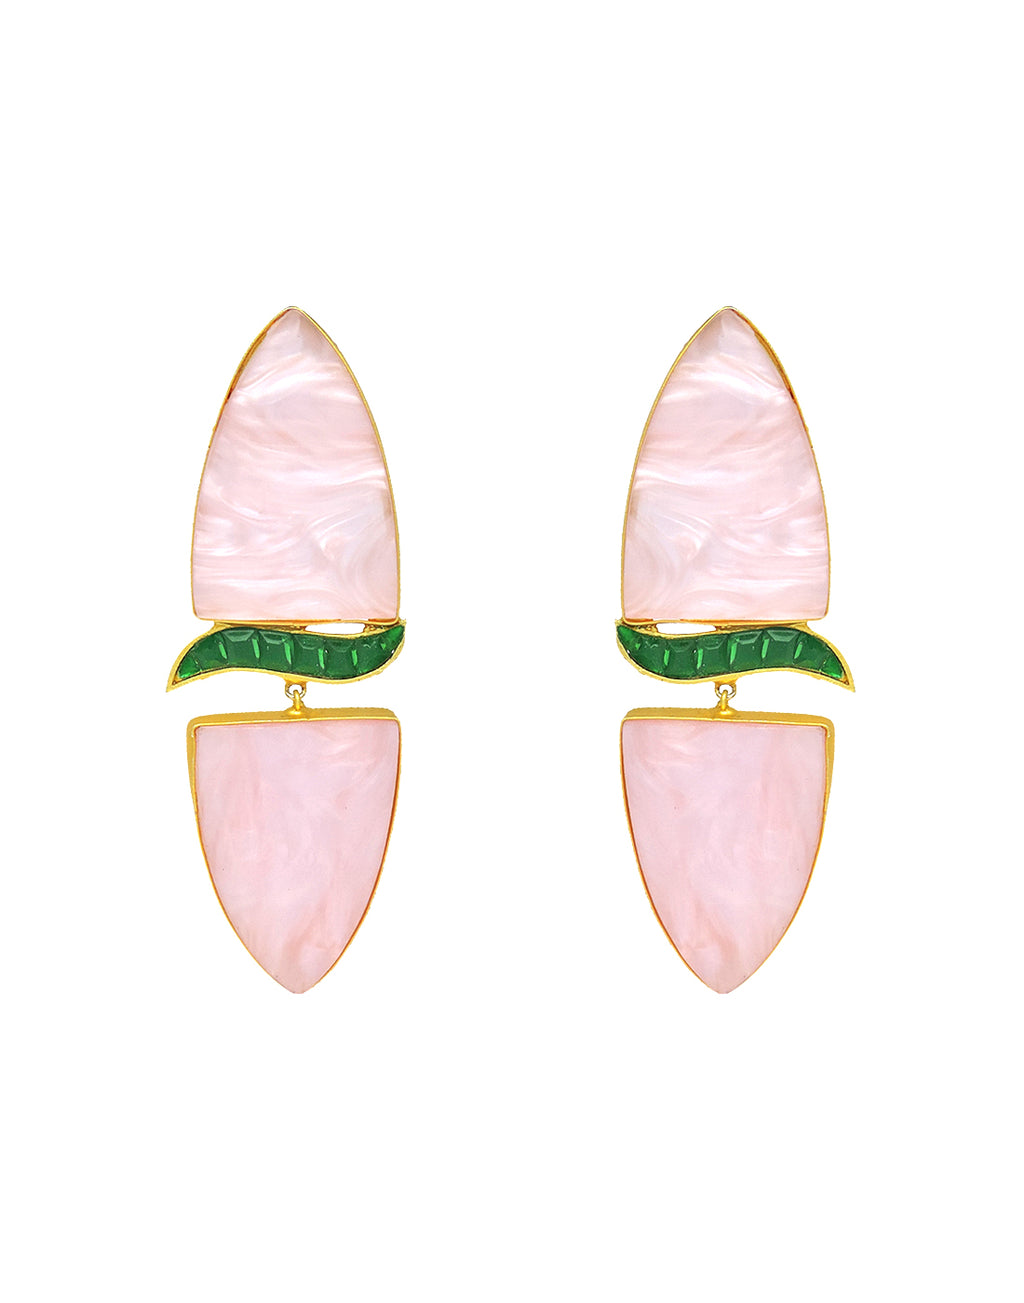 Cylinder Wave Earrings | Green & Raspberry - Statement Earrings - Gold-Plated & Hypoallergenic - Made in India - Dubai Jewellery - Dori